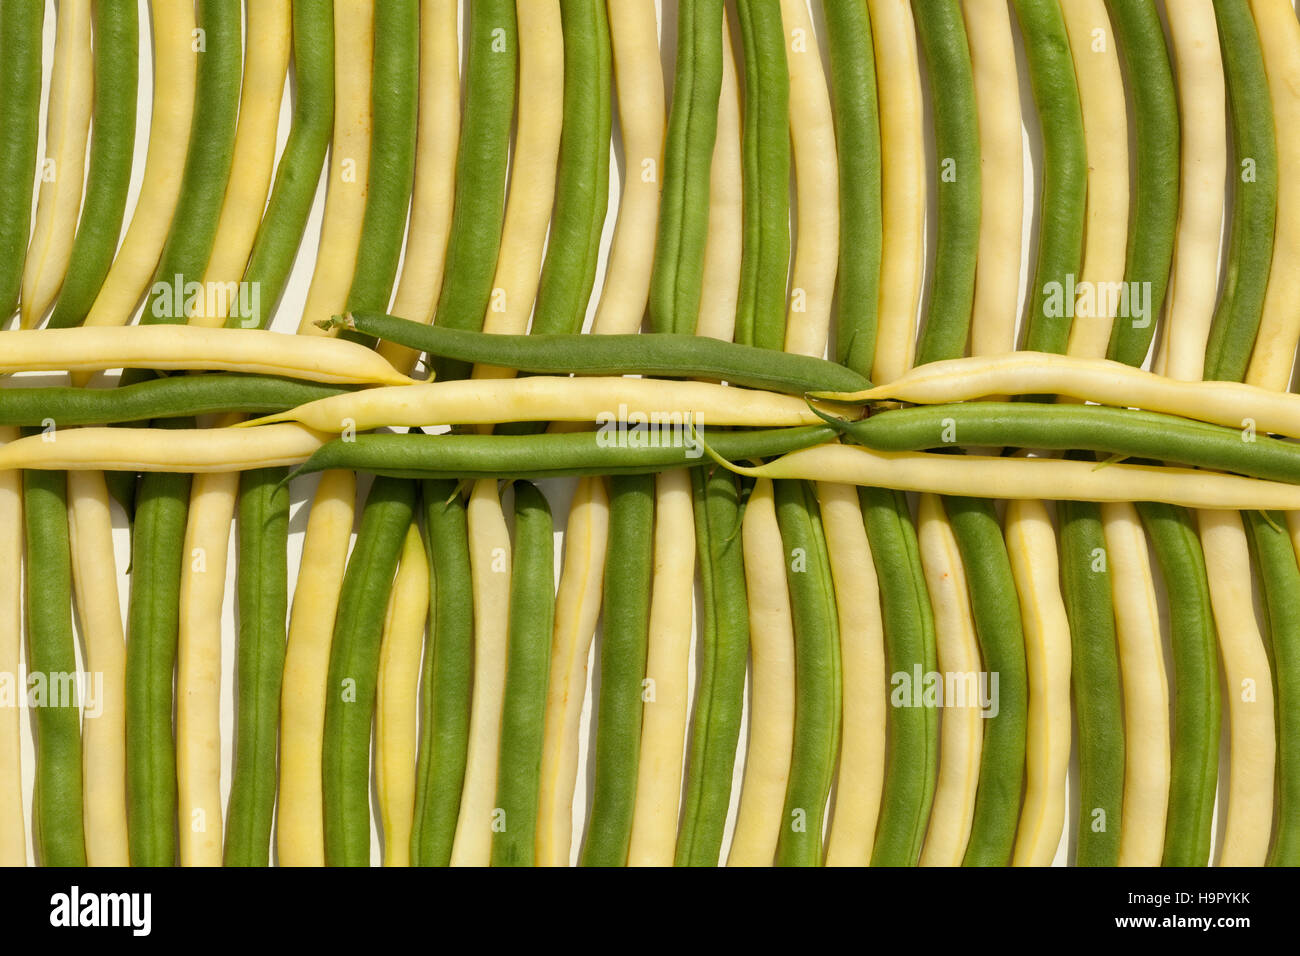 fresh green and yellow bean a arranged vertically Stock Photo